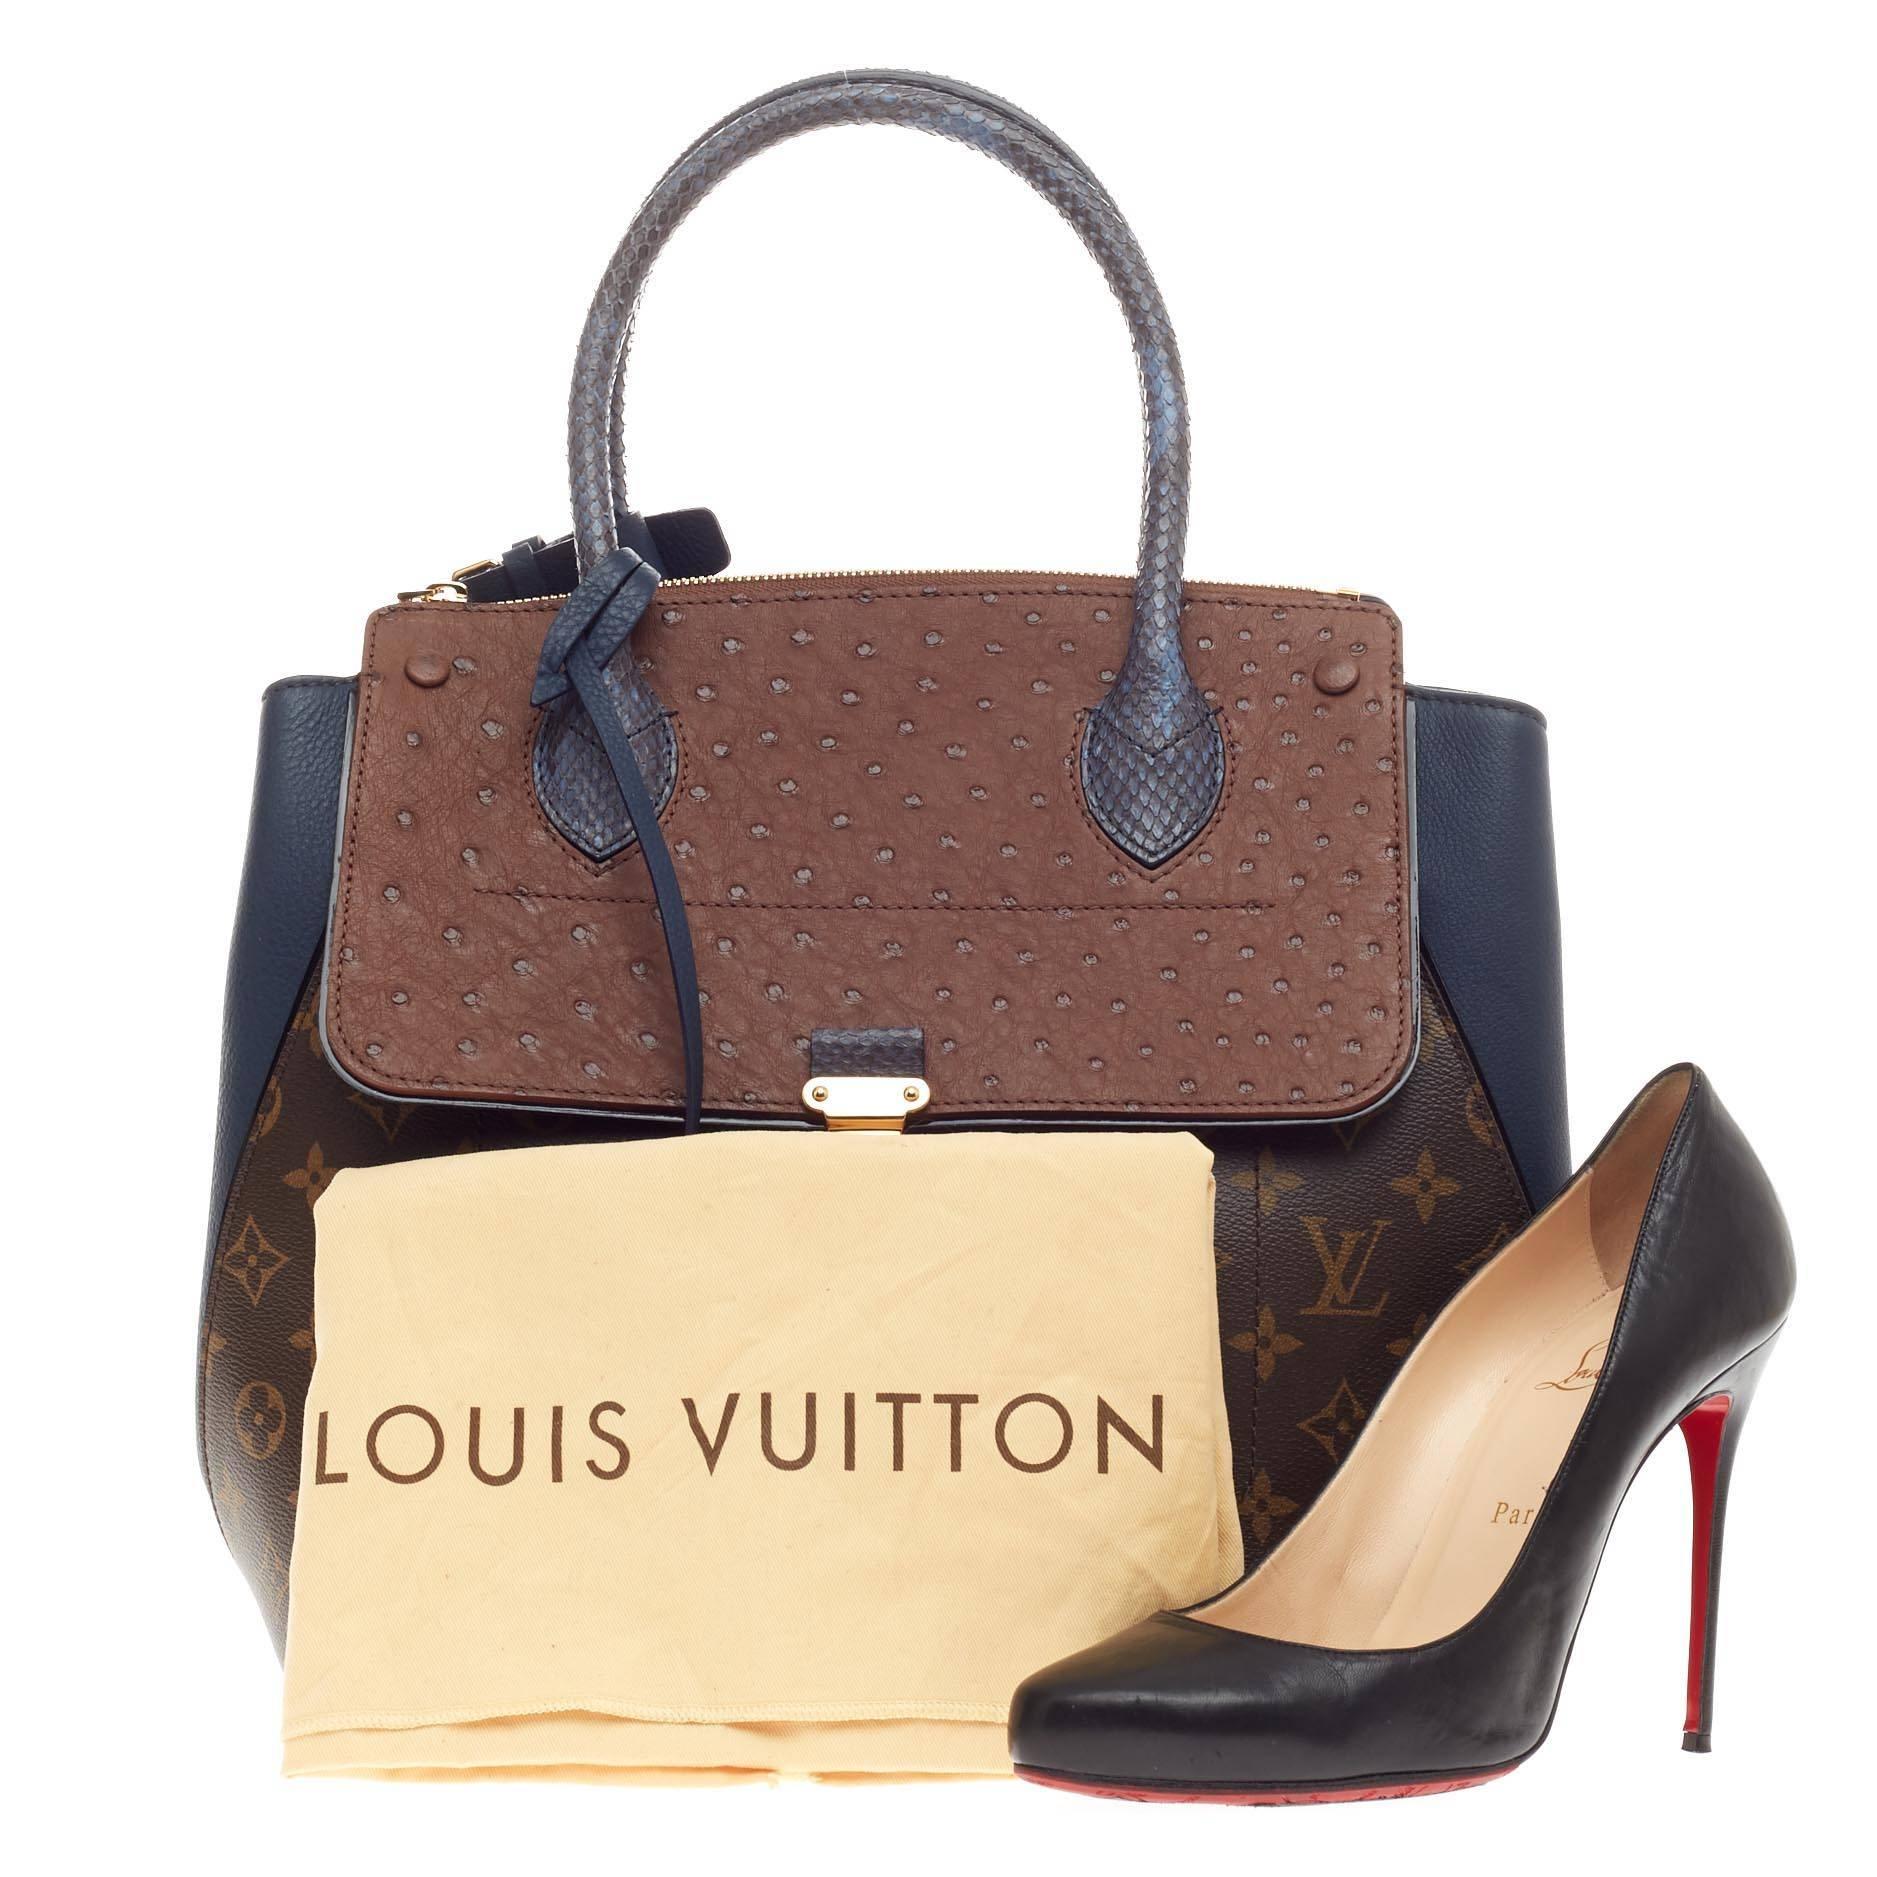 This authentic Louis Vuitton Majestueux Tote Monogram Canvas and Exotics MM presented in the brand's Fall/Winter 2012 Collection showcases an avant-garde design inspired by the brand's luxurious heritage. Crafted from the brand’s signature brown